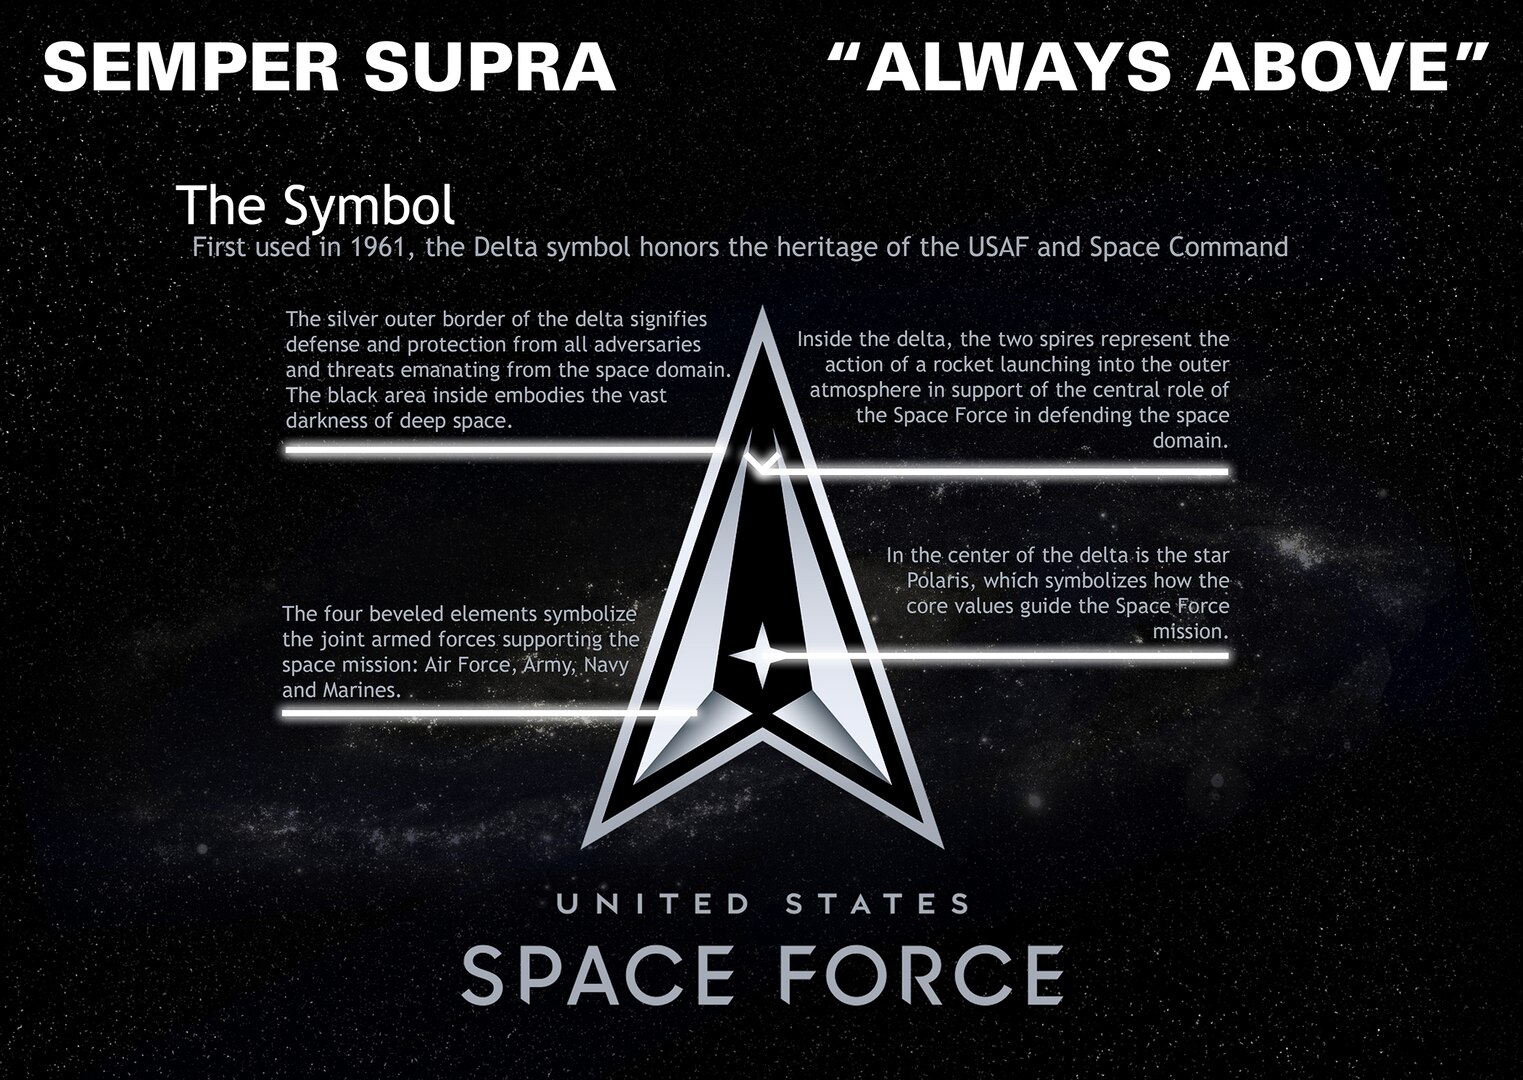 The U.S Space Force released its logo and motto, Semper Supra (Always Above), July 22. The logo and motto honor the heritage and history of the U.S. Space Force.